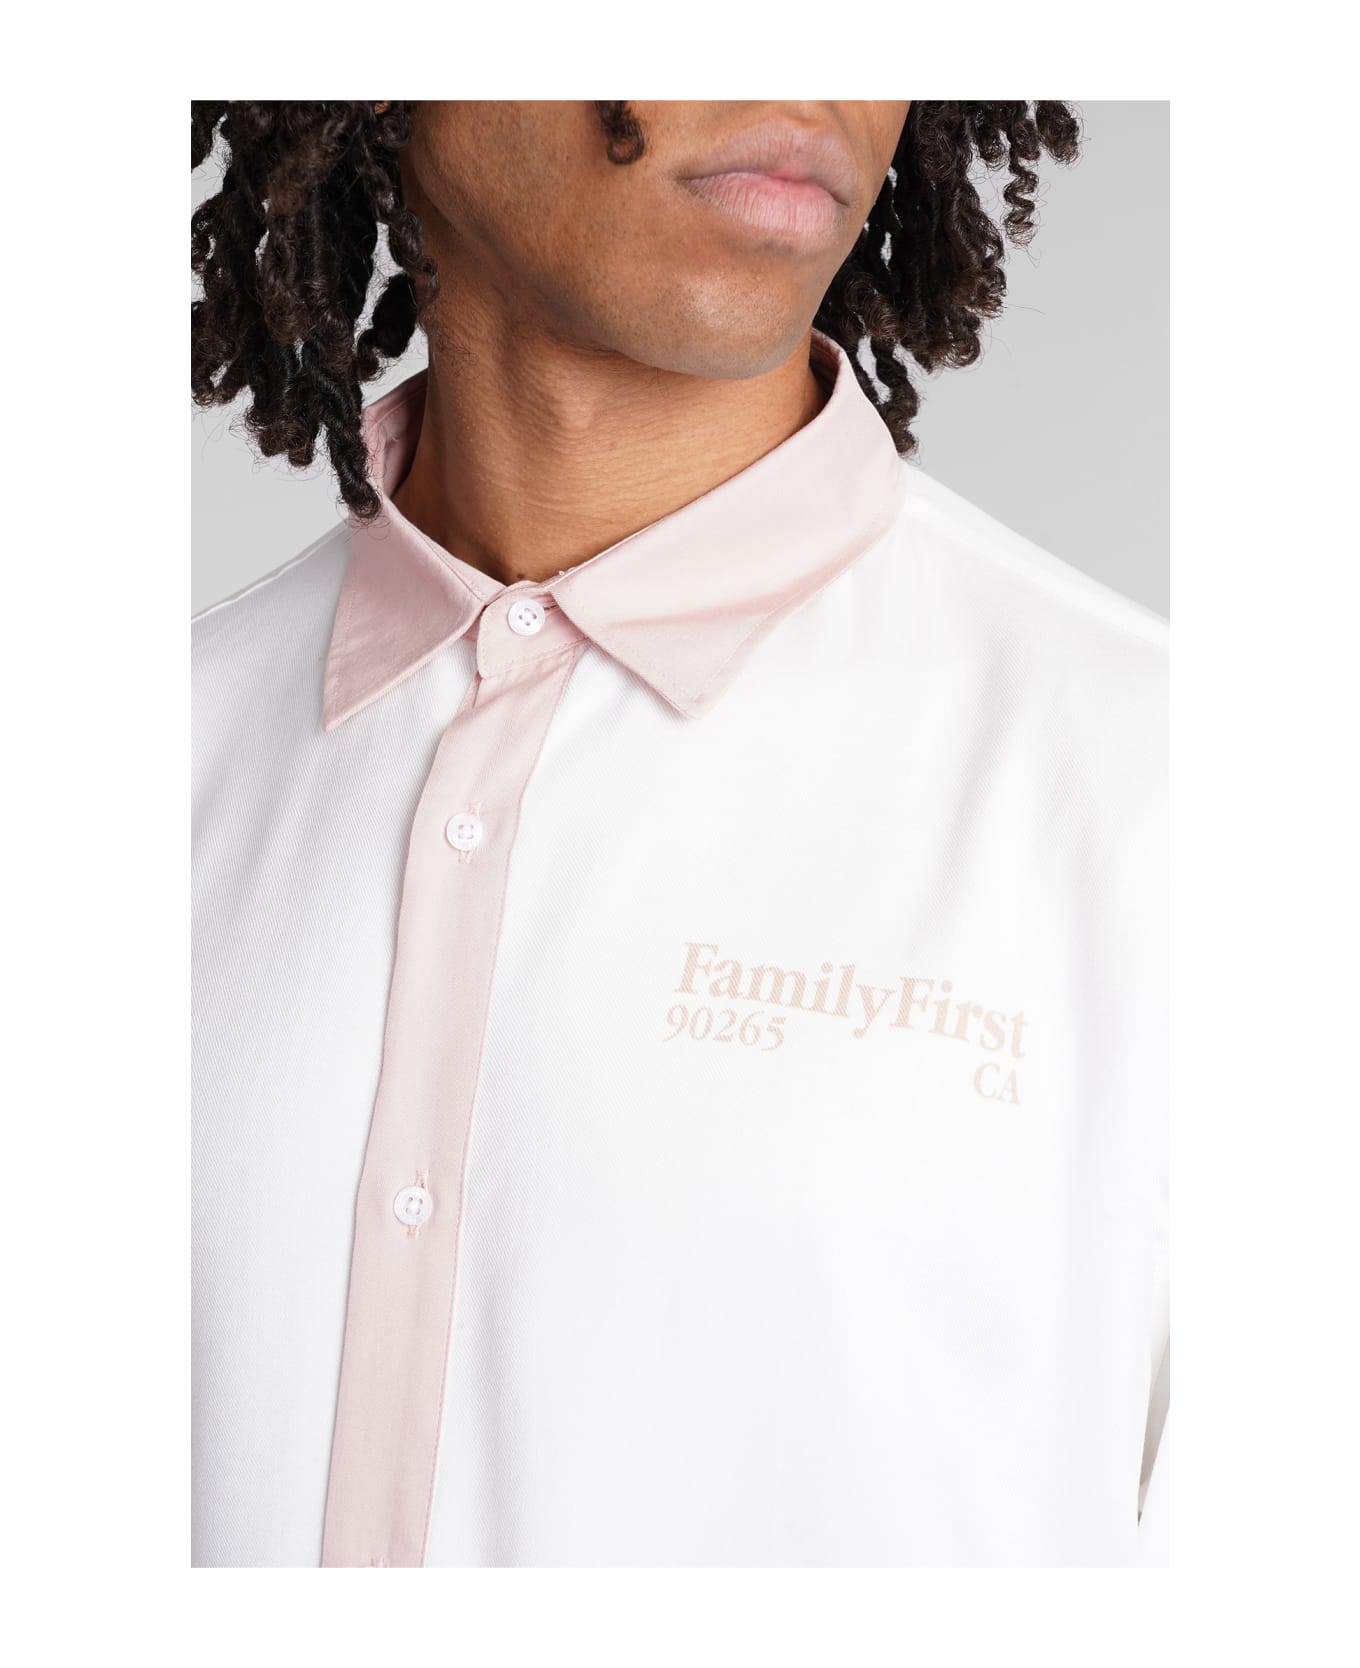 Family First Milano Shirt In White Viscose - white